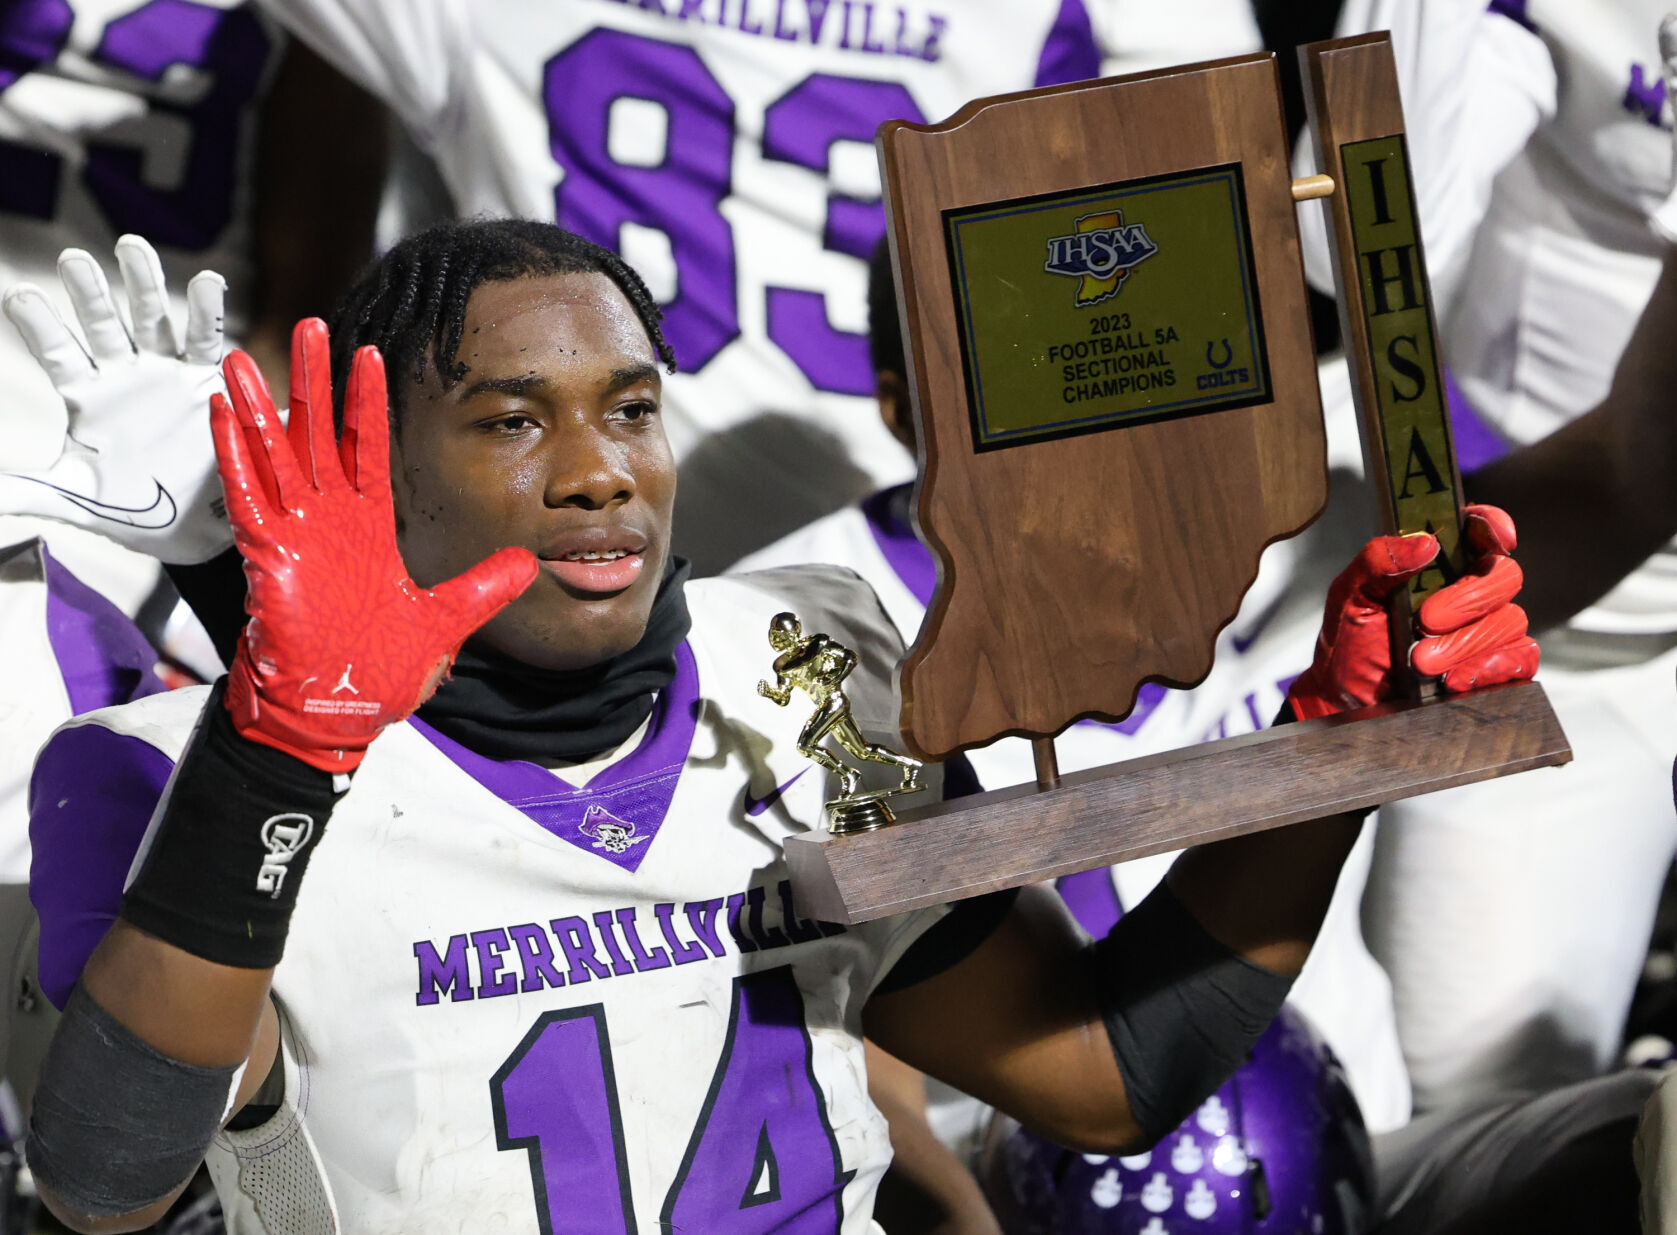 Trey Stephens’ 101 Yards and Two Touchdowns Lead Merrillville to 42-18 Win over Morton in Sectional 9 Championship